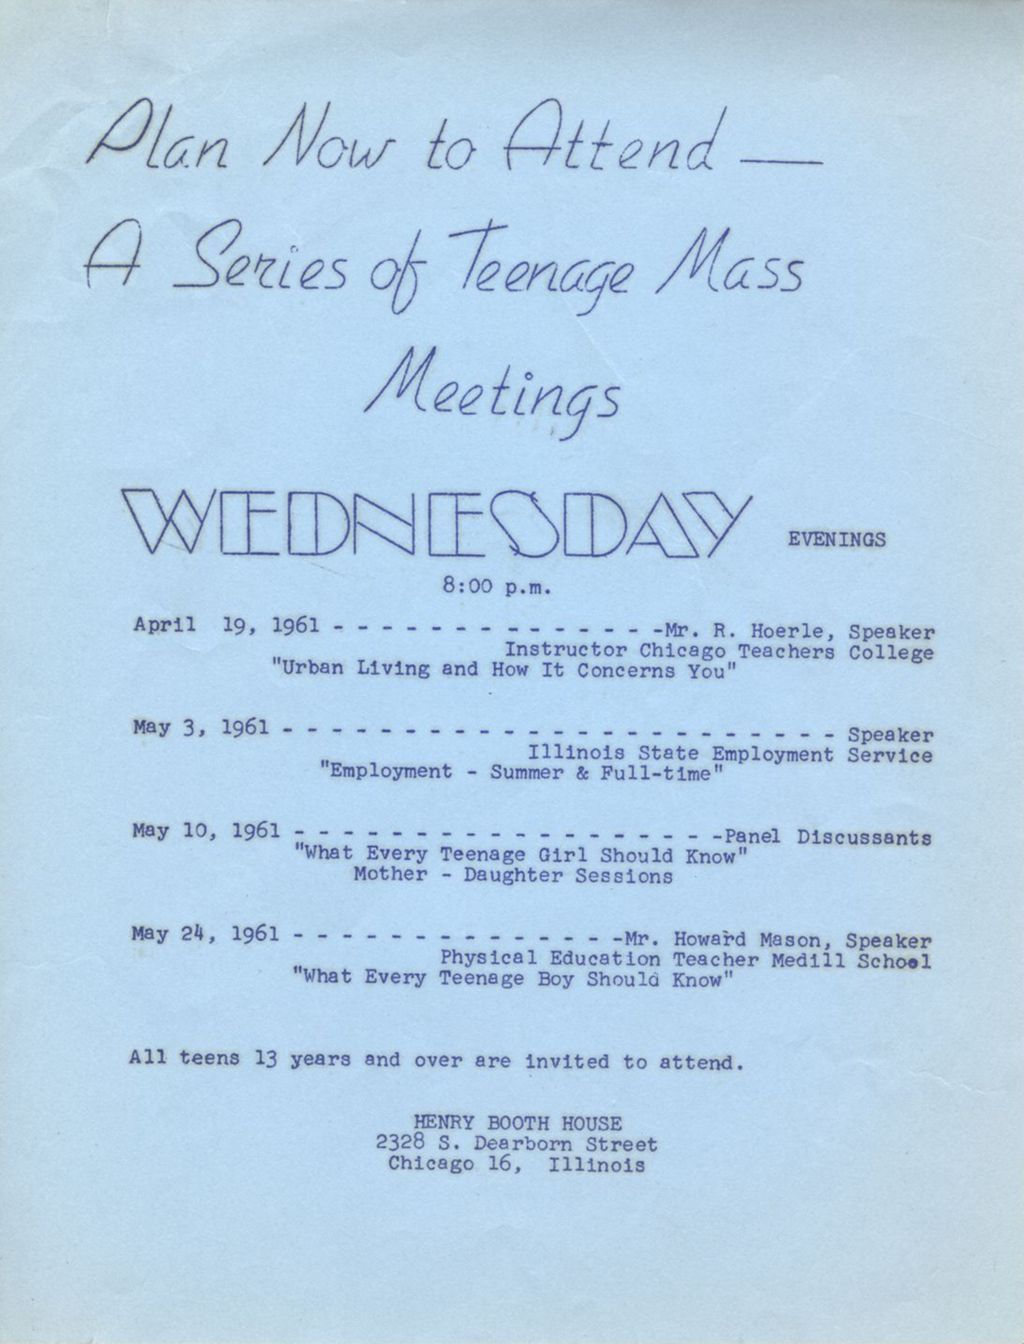 Teenage Mass Meetings flyer, Henry Booth House